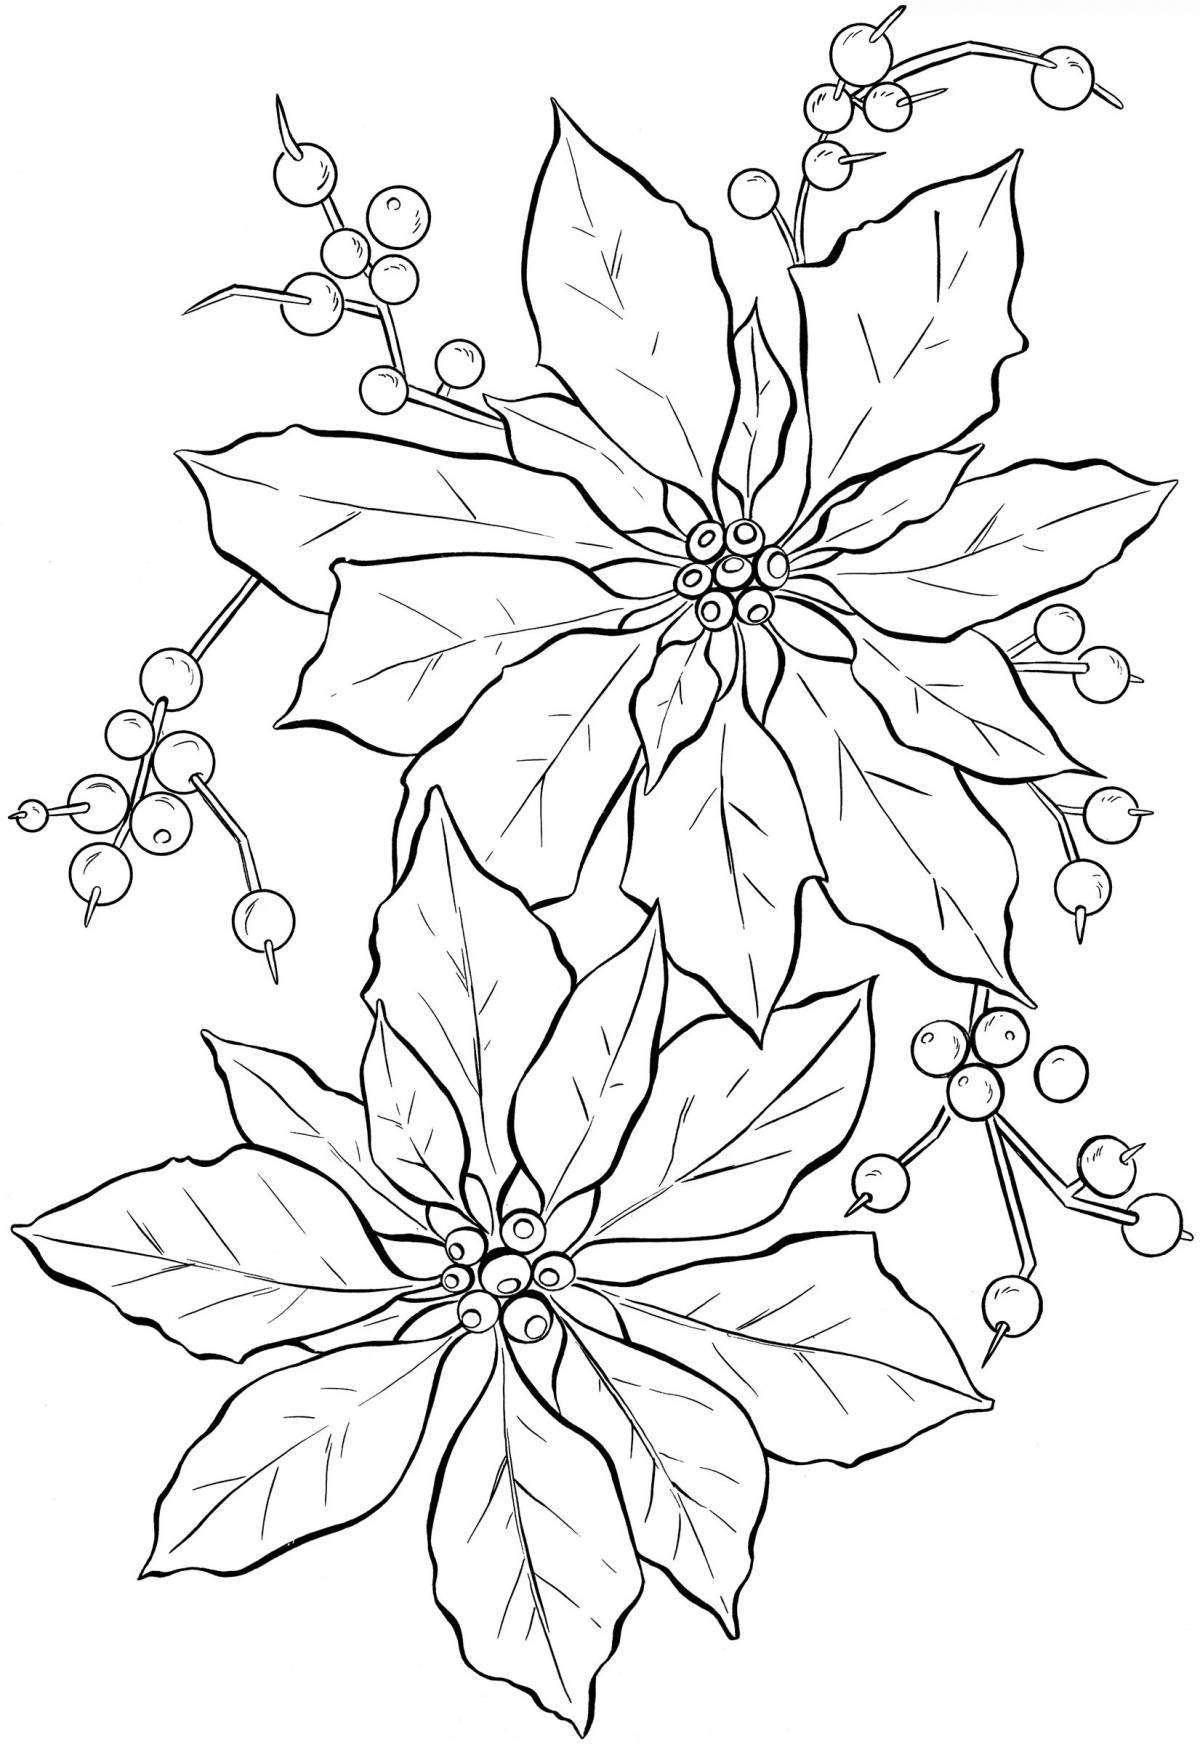 Colouring cheerful winter bouquet